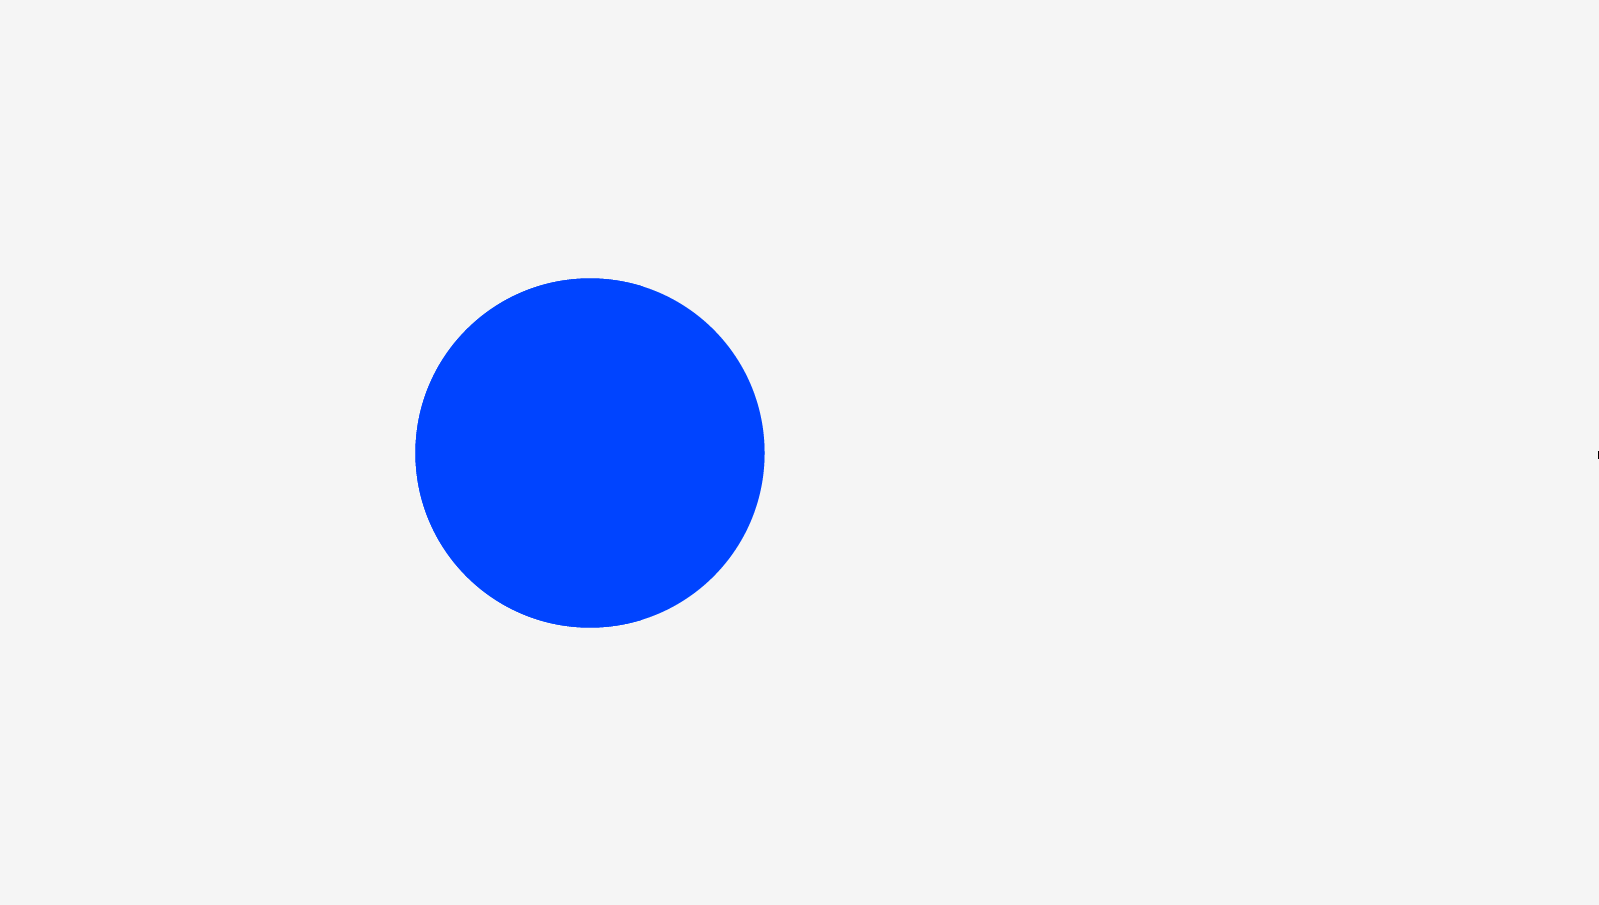 A dashed circle partially covering a filled circle.